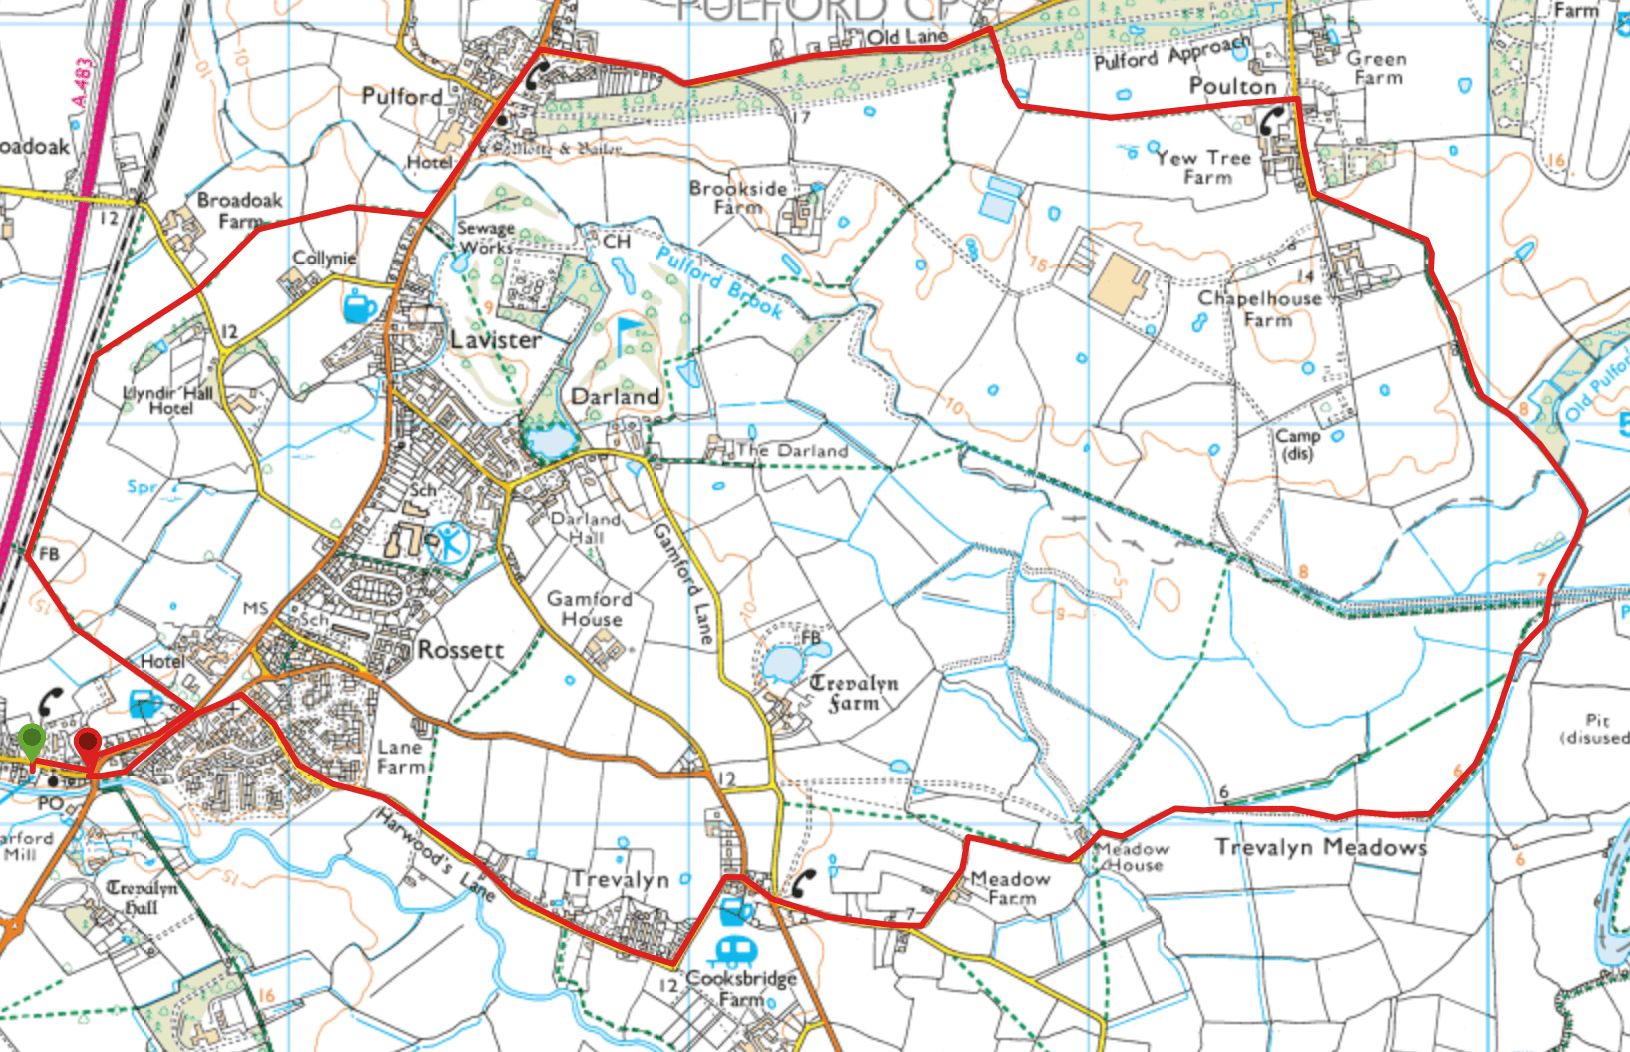 Pulford, Poulton and Trevalyn Meadows Map.